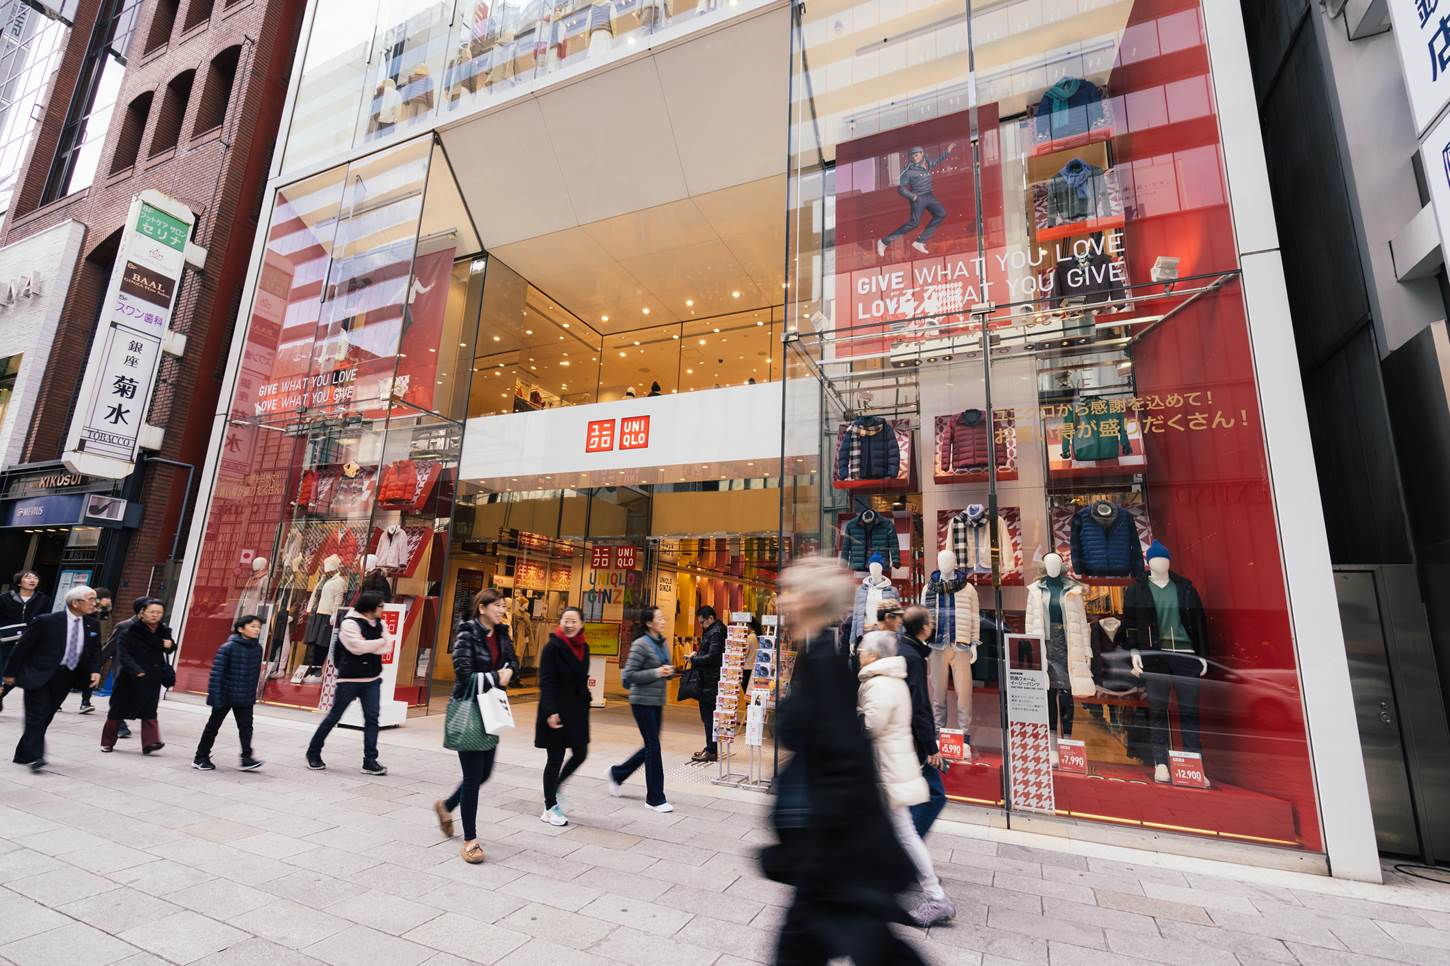 People and tourists walking and shopping in front of Uniqlo famous Japanese clothing represent modern consumerism = Shutterstock